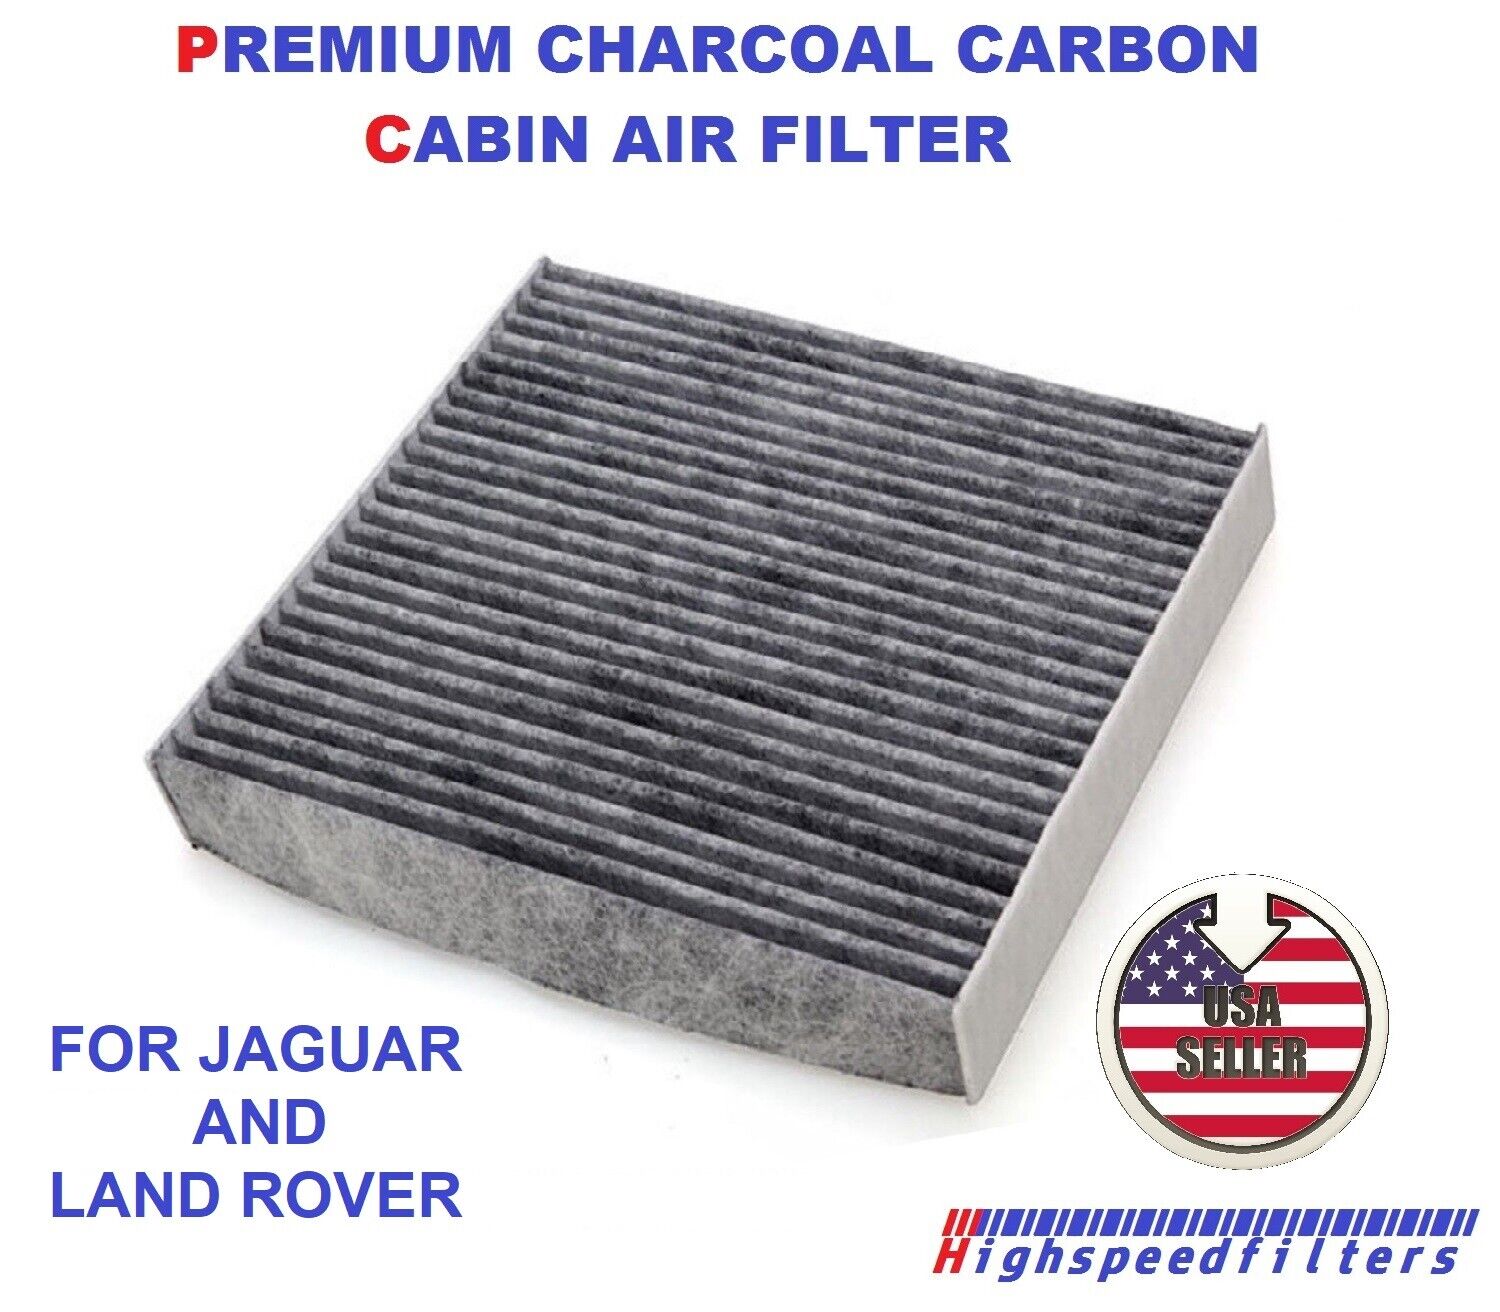 PREMIUM CHARCOAL Cabin Air Filter for JAGUAR F-PACE I-PACE XE XF & LAND ROVER 